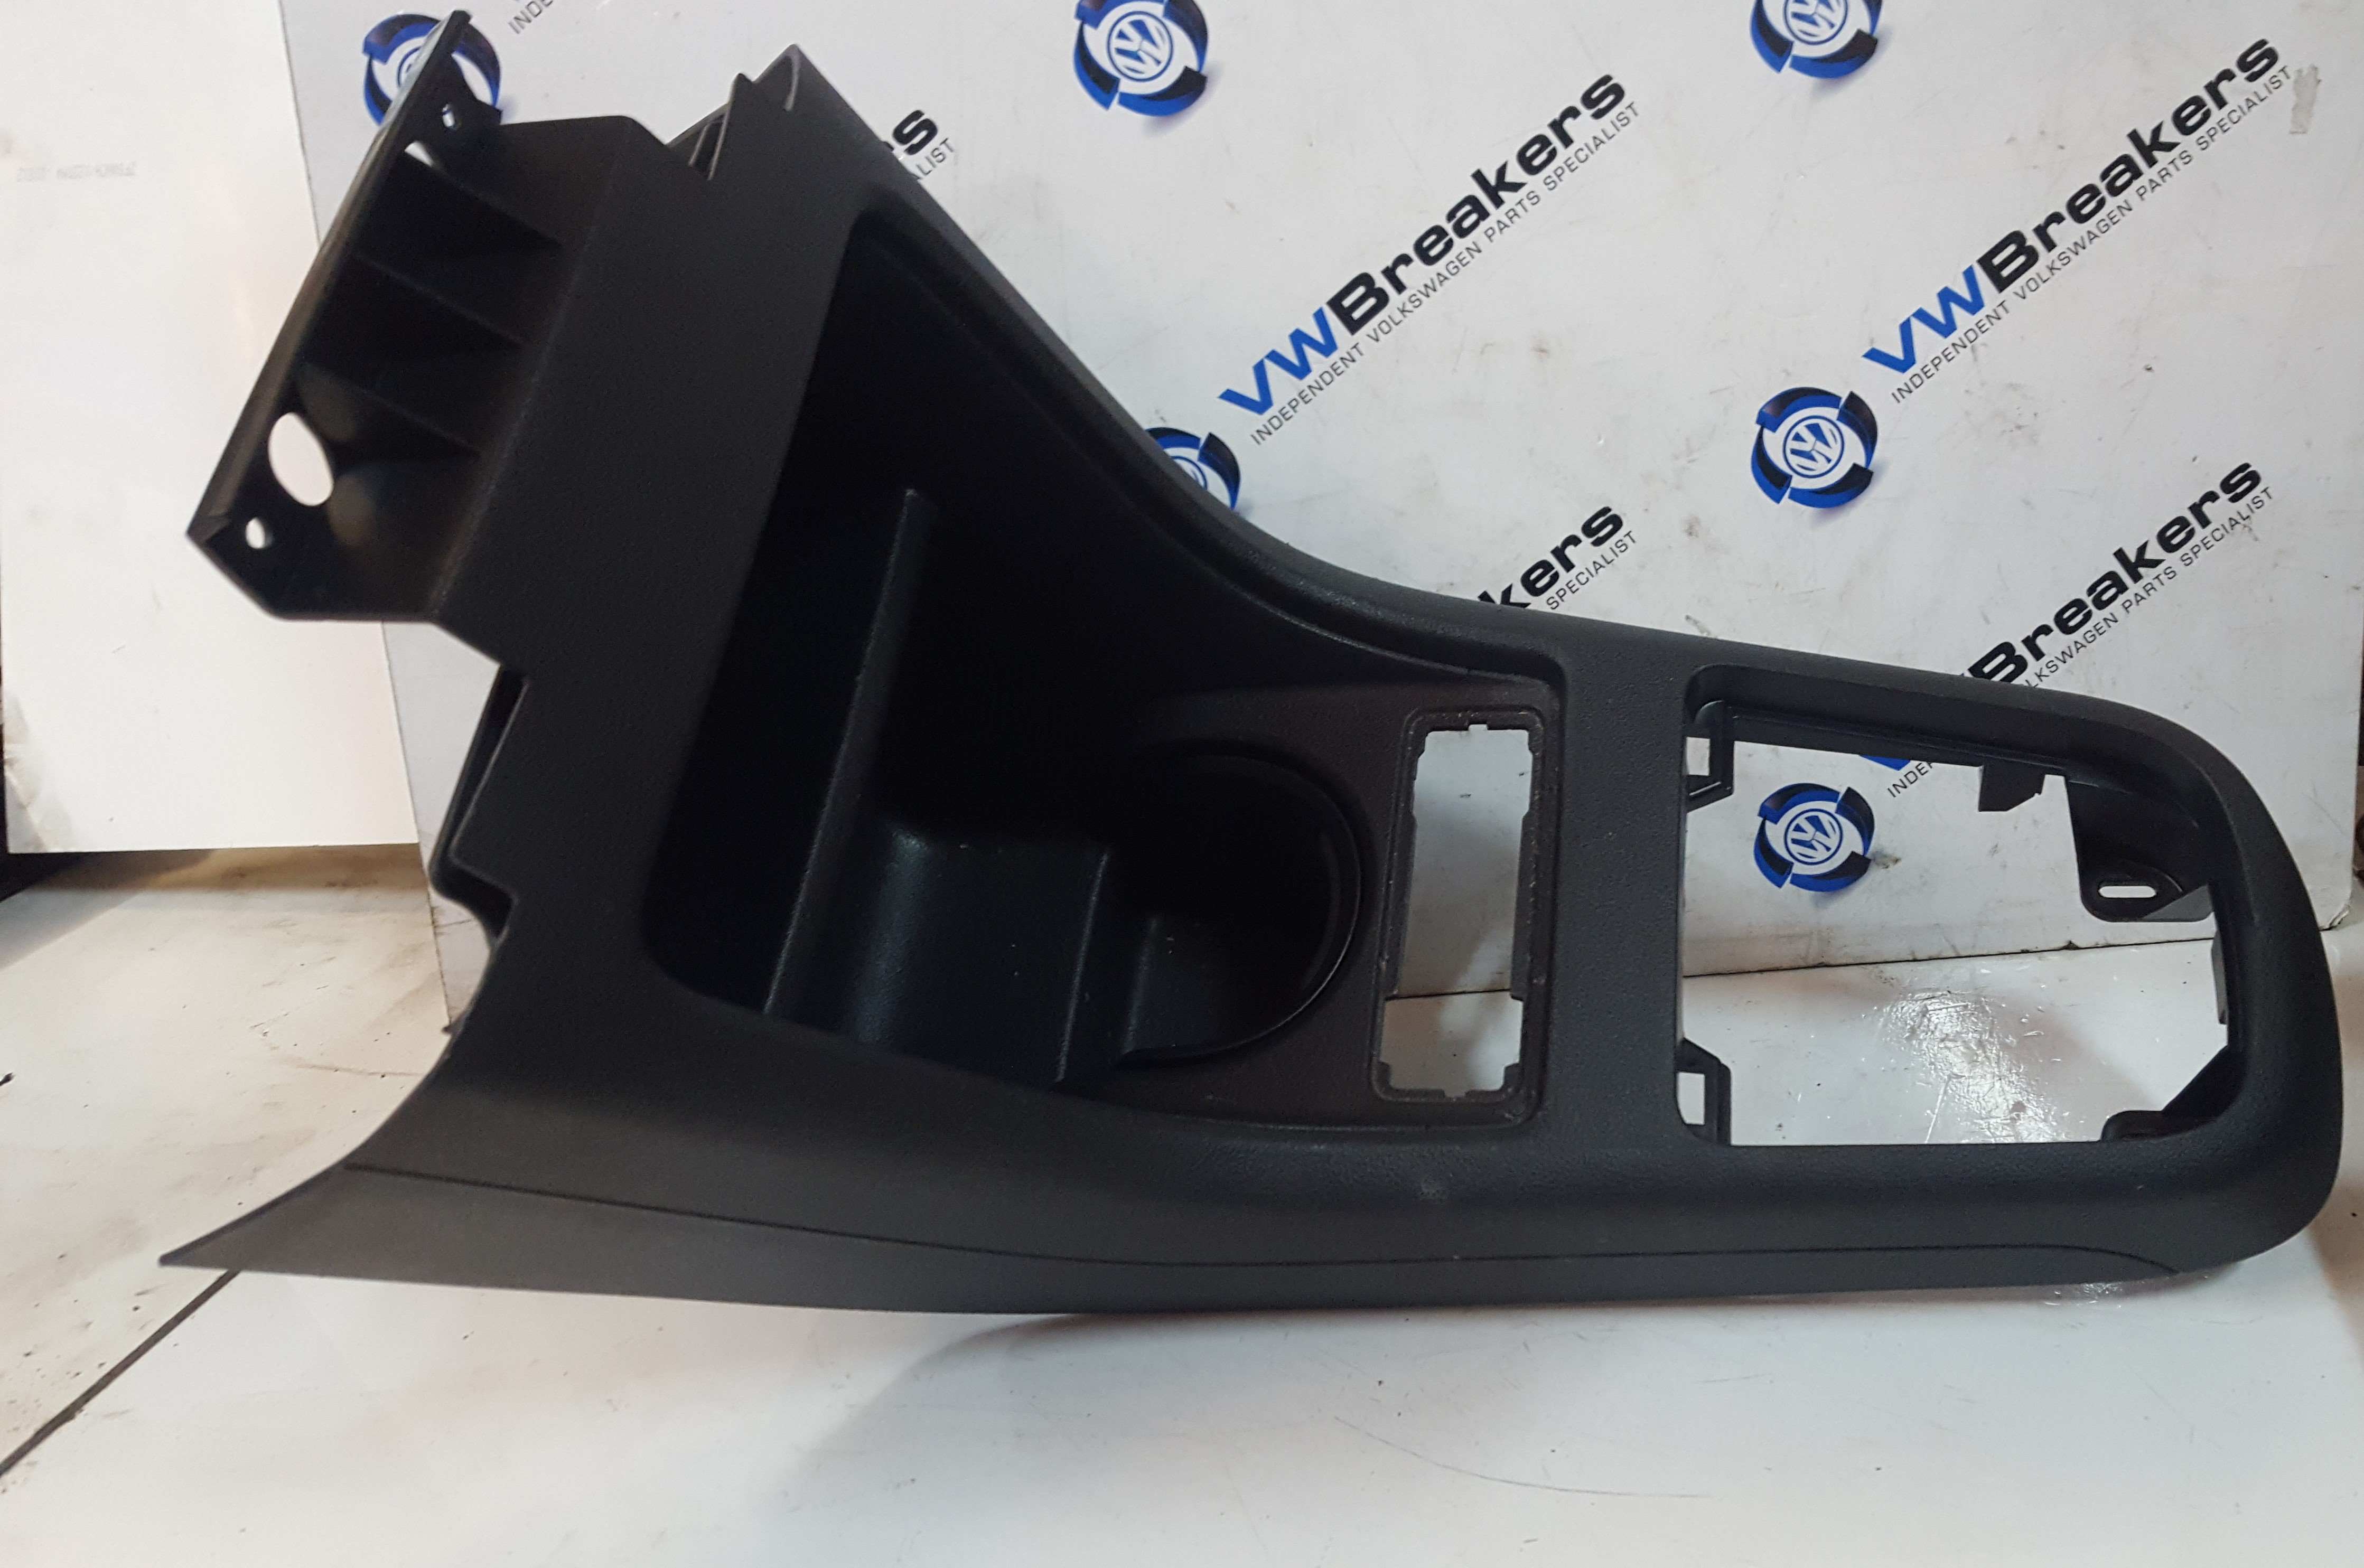 Vw Up Up! 2011-2017 Centre CUP Holder Gear Surround Console 1S0863680be